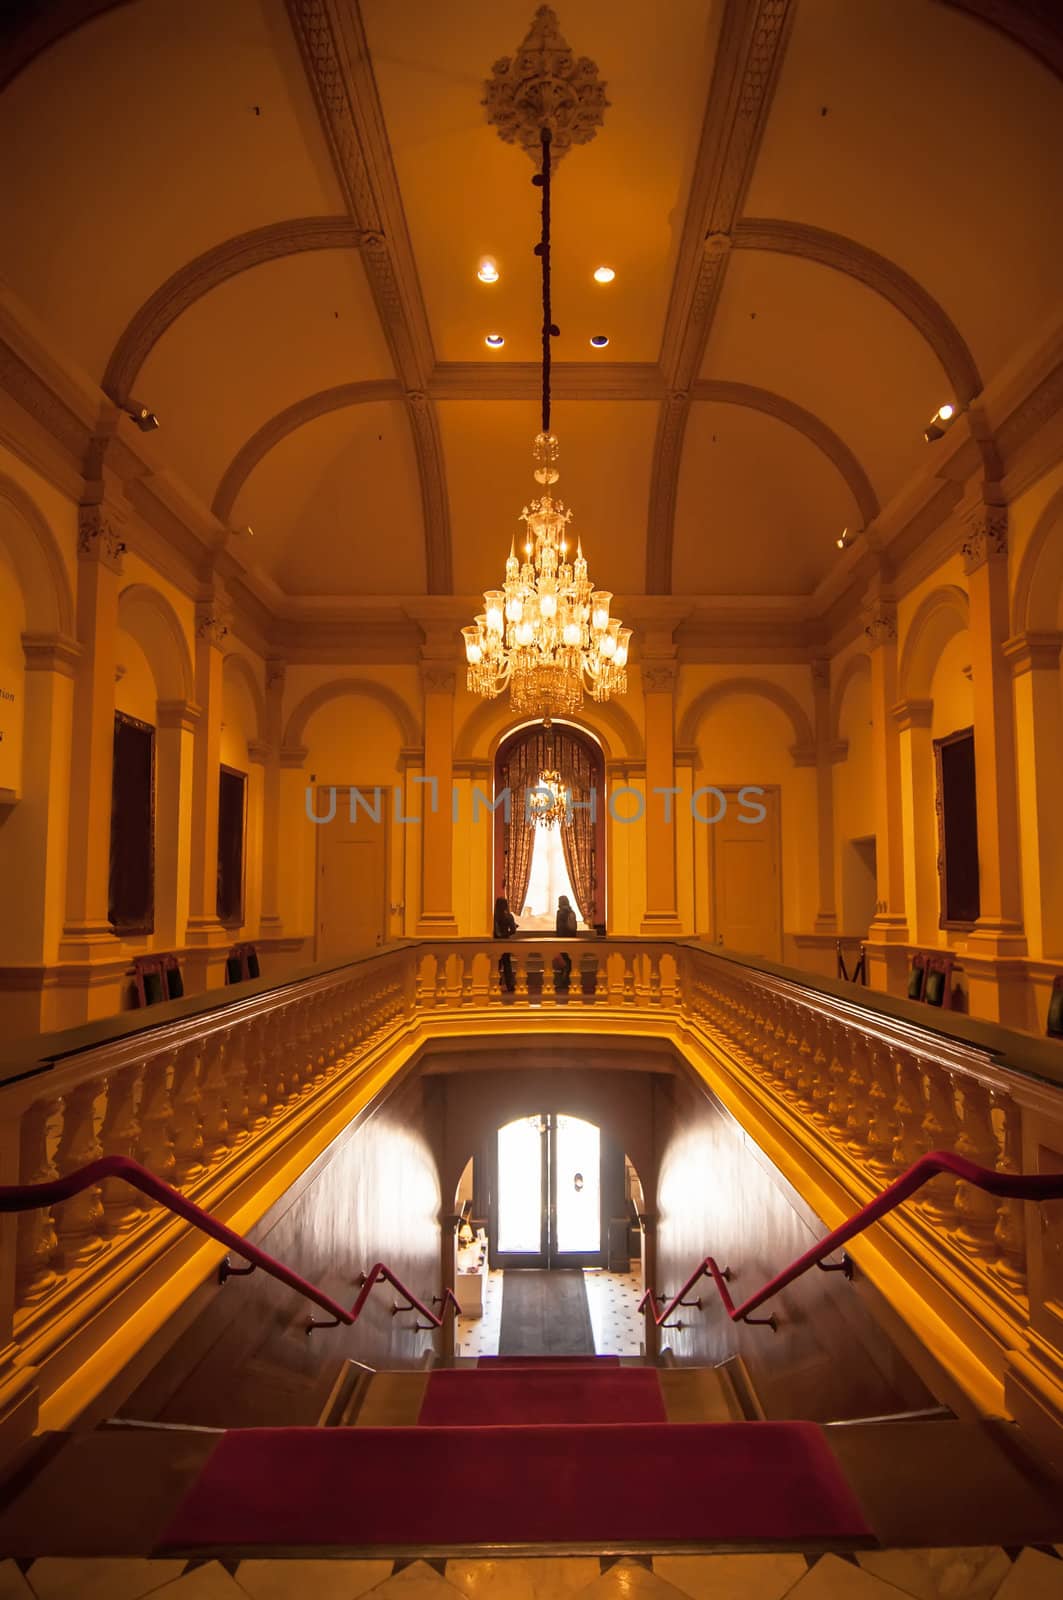 Beautiful Staircase  Luxury Stairway Entry Architecture Stock Images, Photos of Staircase, Living room, Dining Room, Bathroom, Kitchen, Bed room, Office, Interior photography.